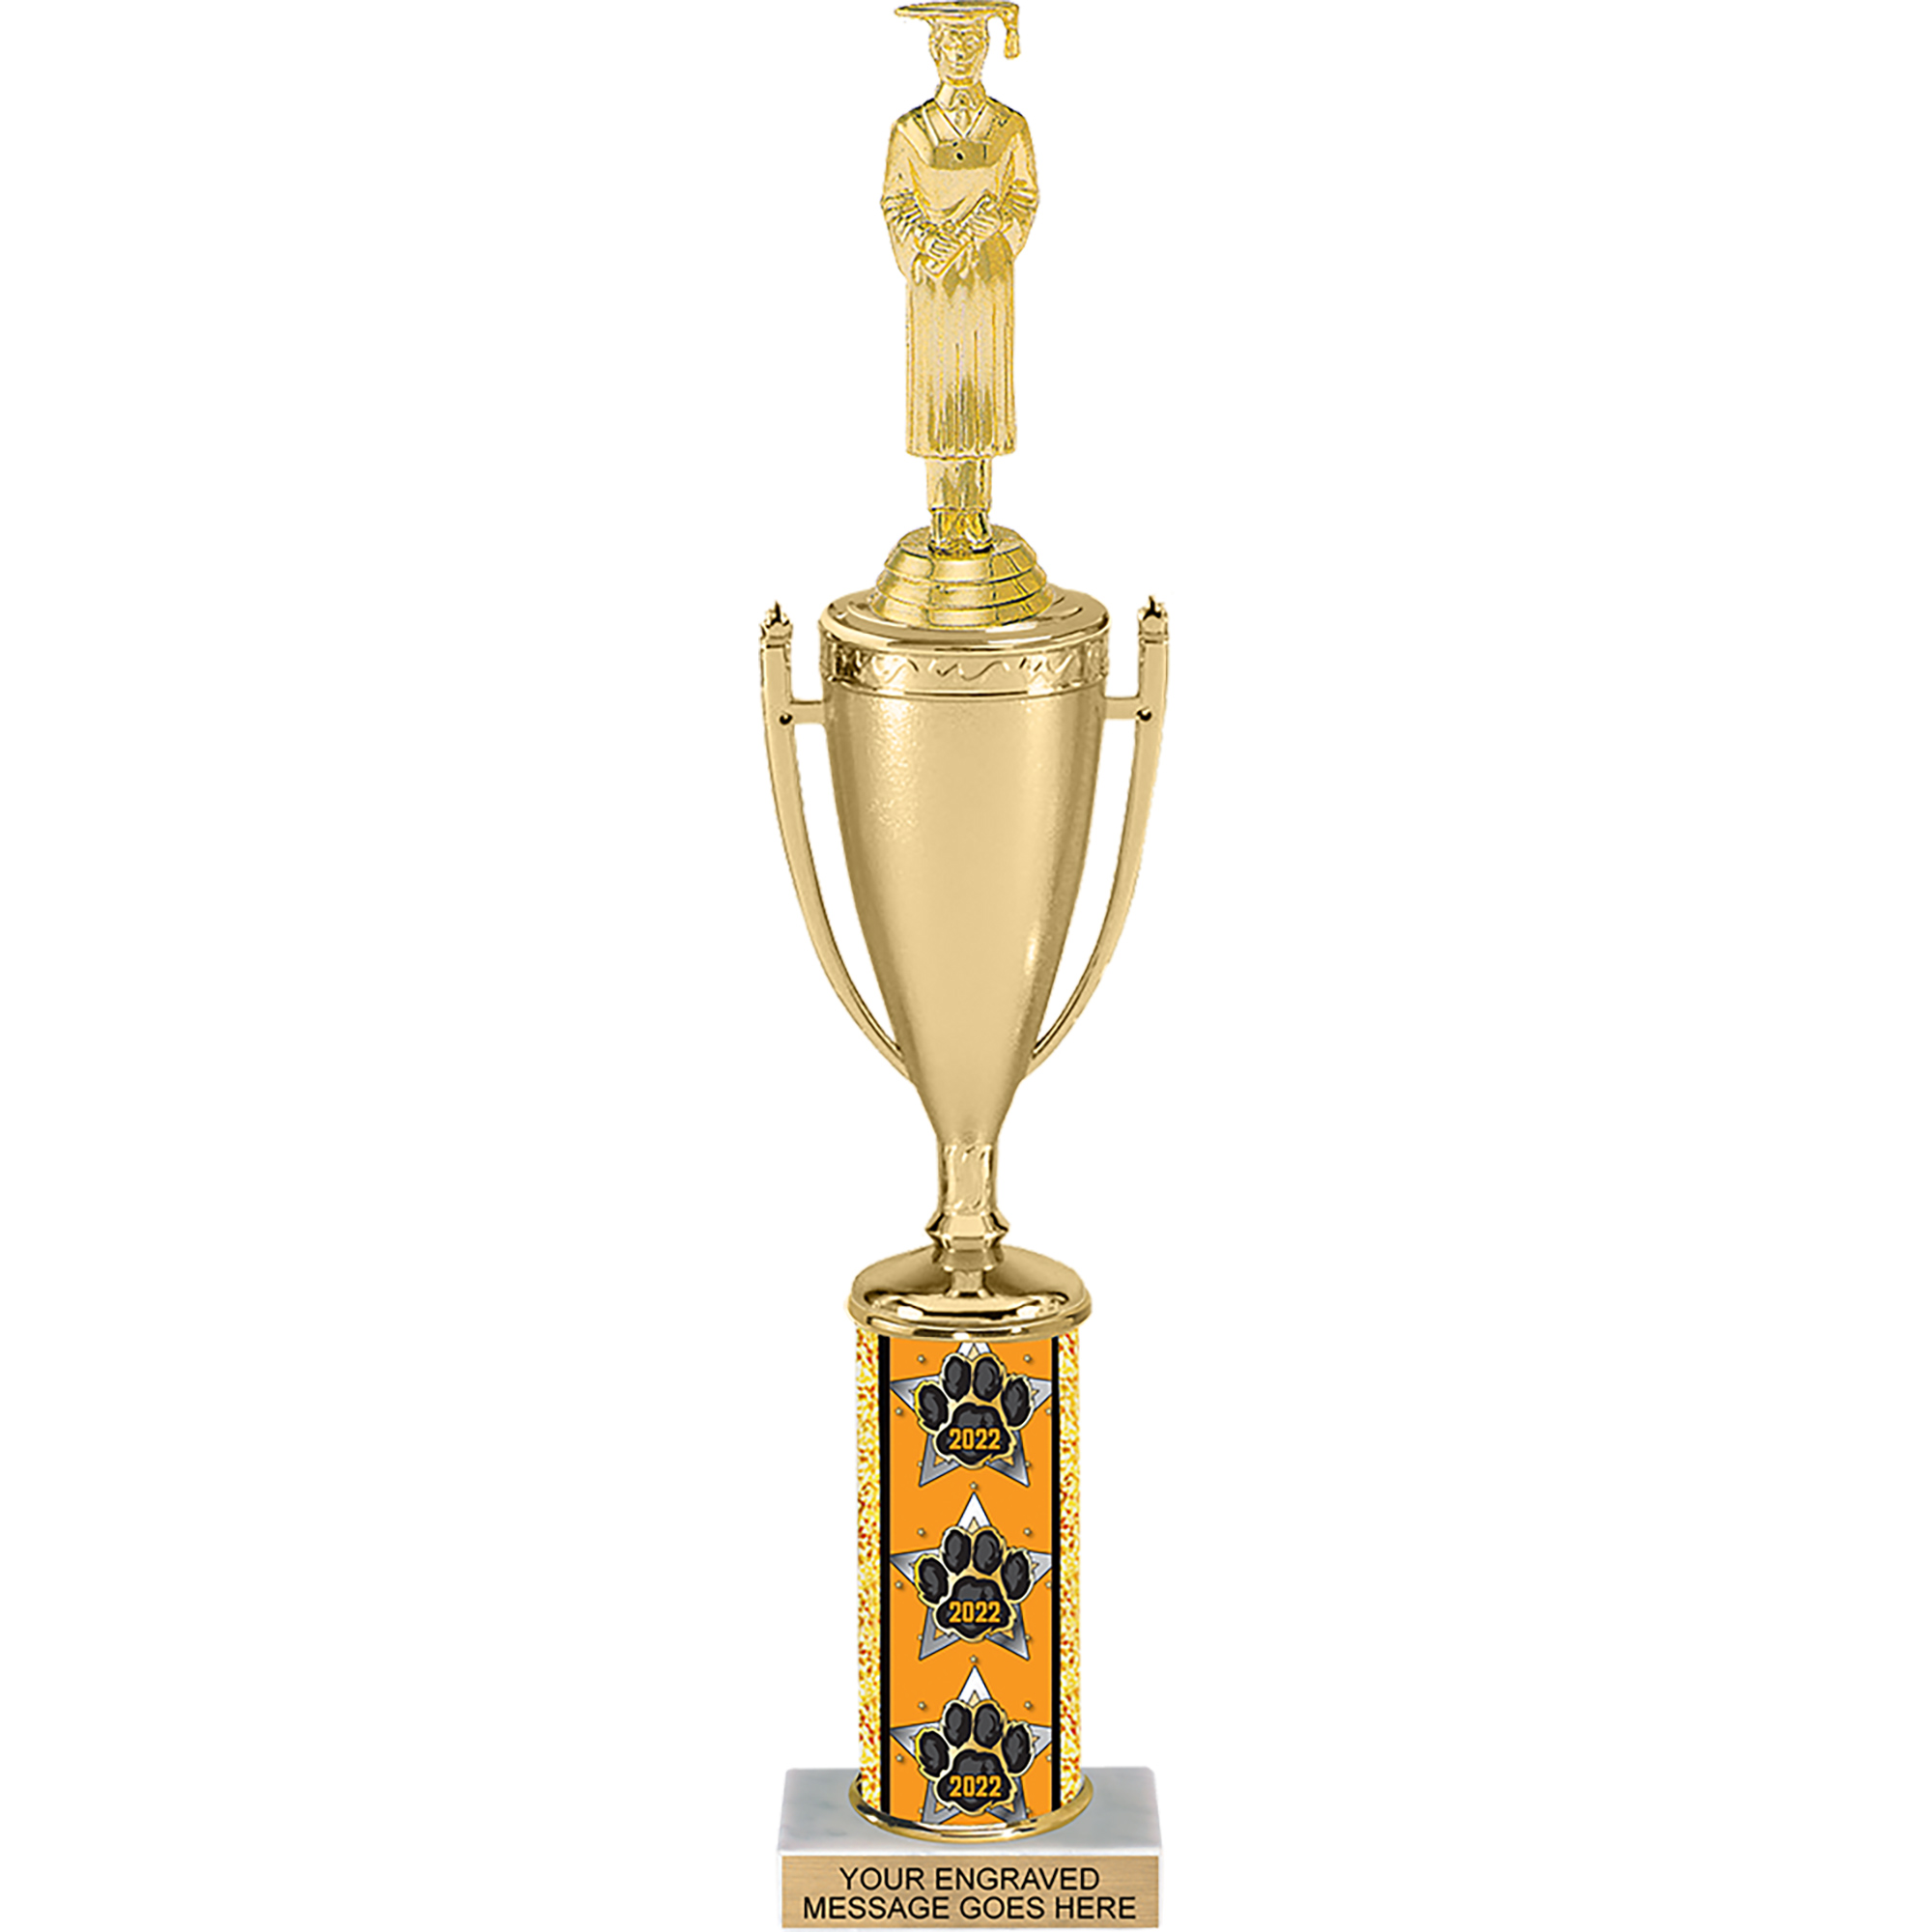 Paw Column Cup Trophy for 2022 - 15 inch